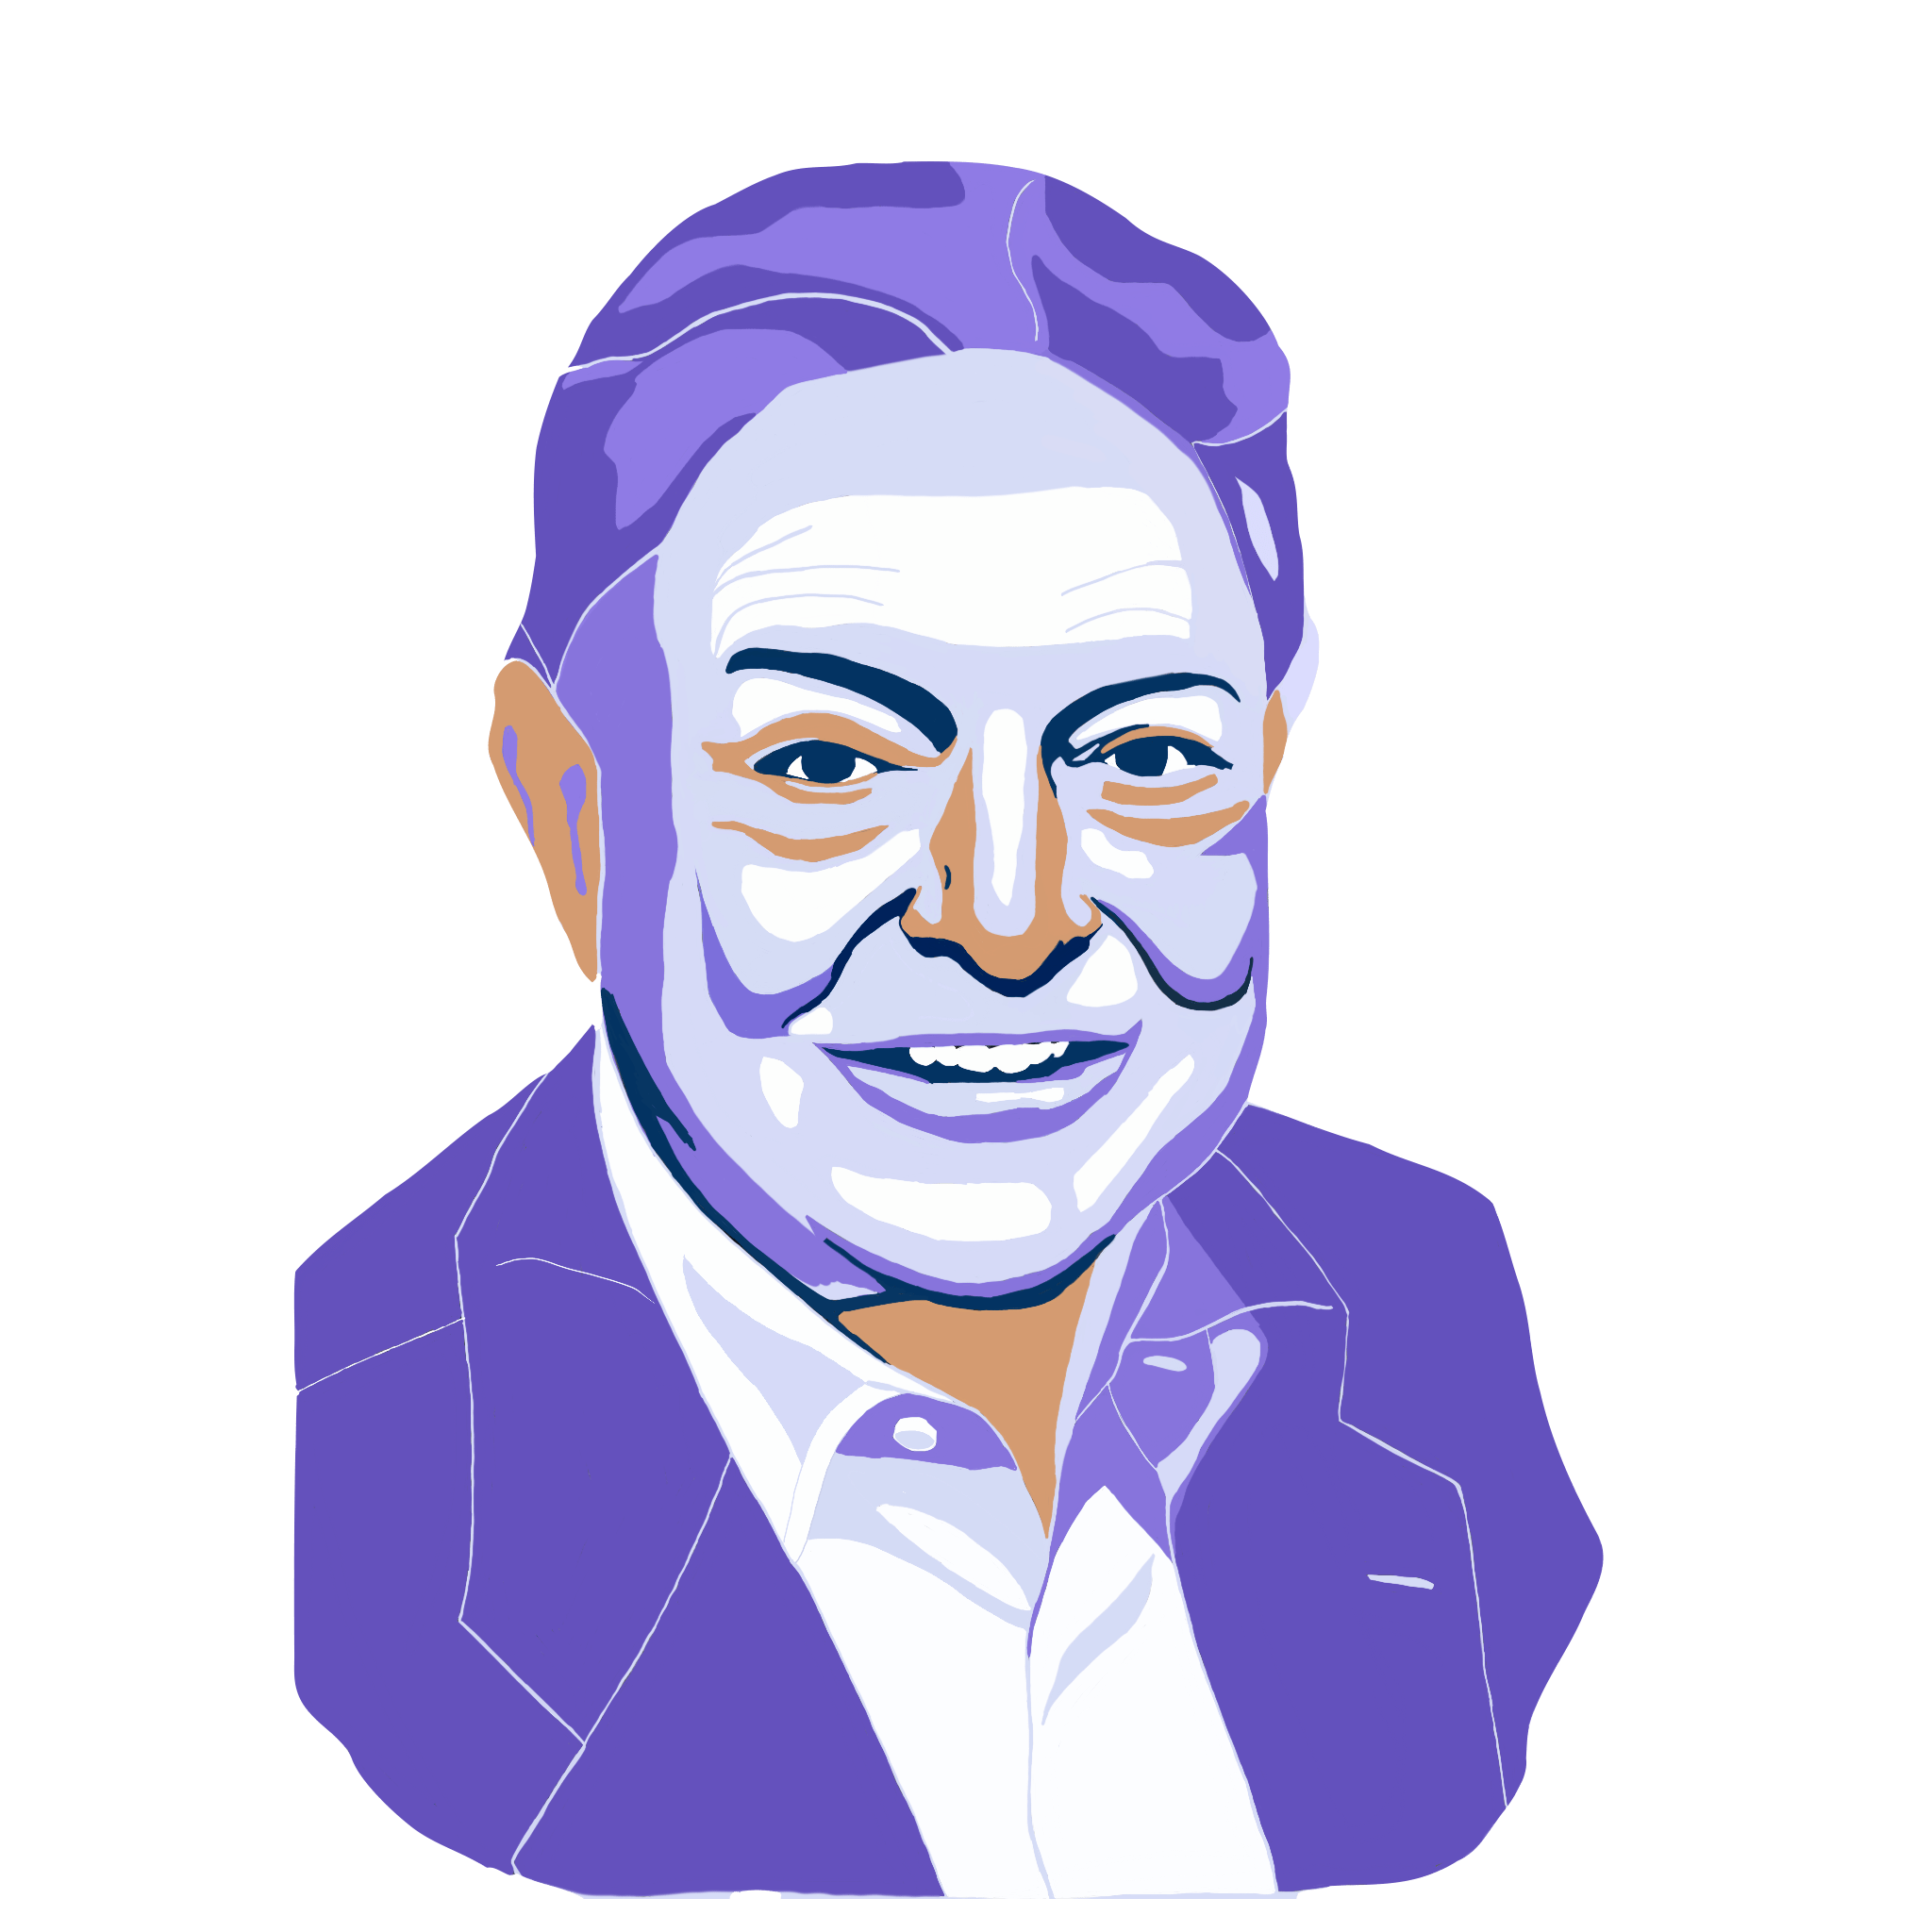 Who is  Artificial Intelligence?George Soros